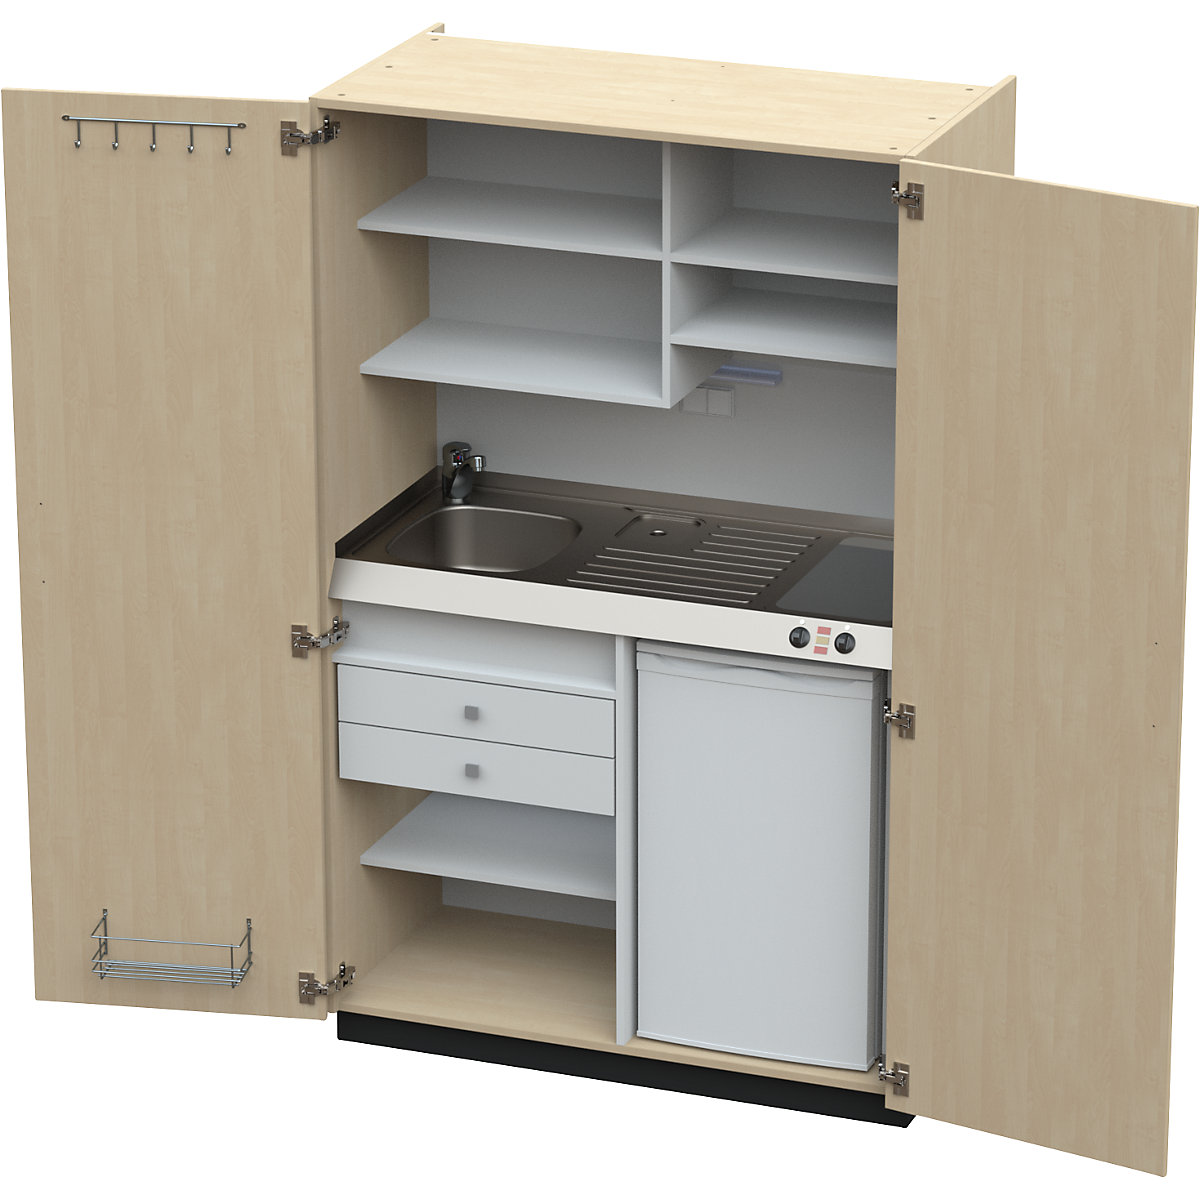 Kitchen unit with hinged doors, 2 glass ceramic hotplates, basin at left, birch, 1956 x 1200 x 650 mm-4